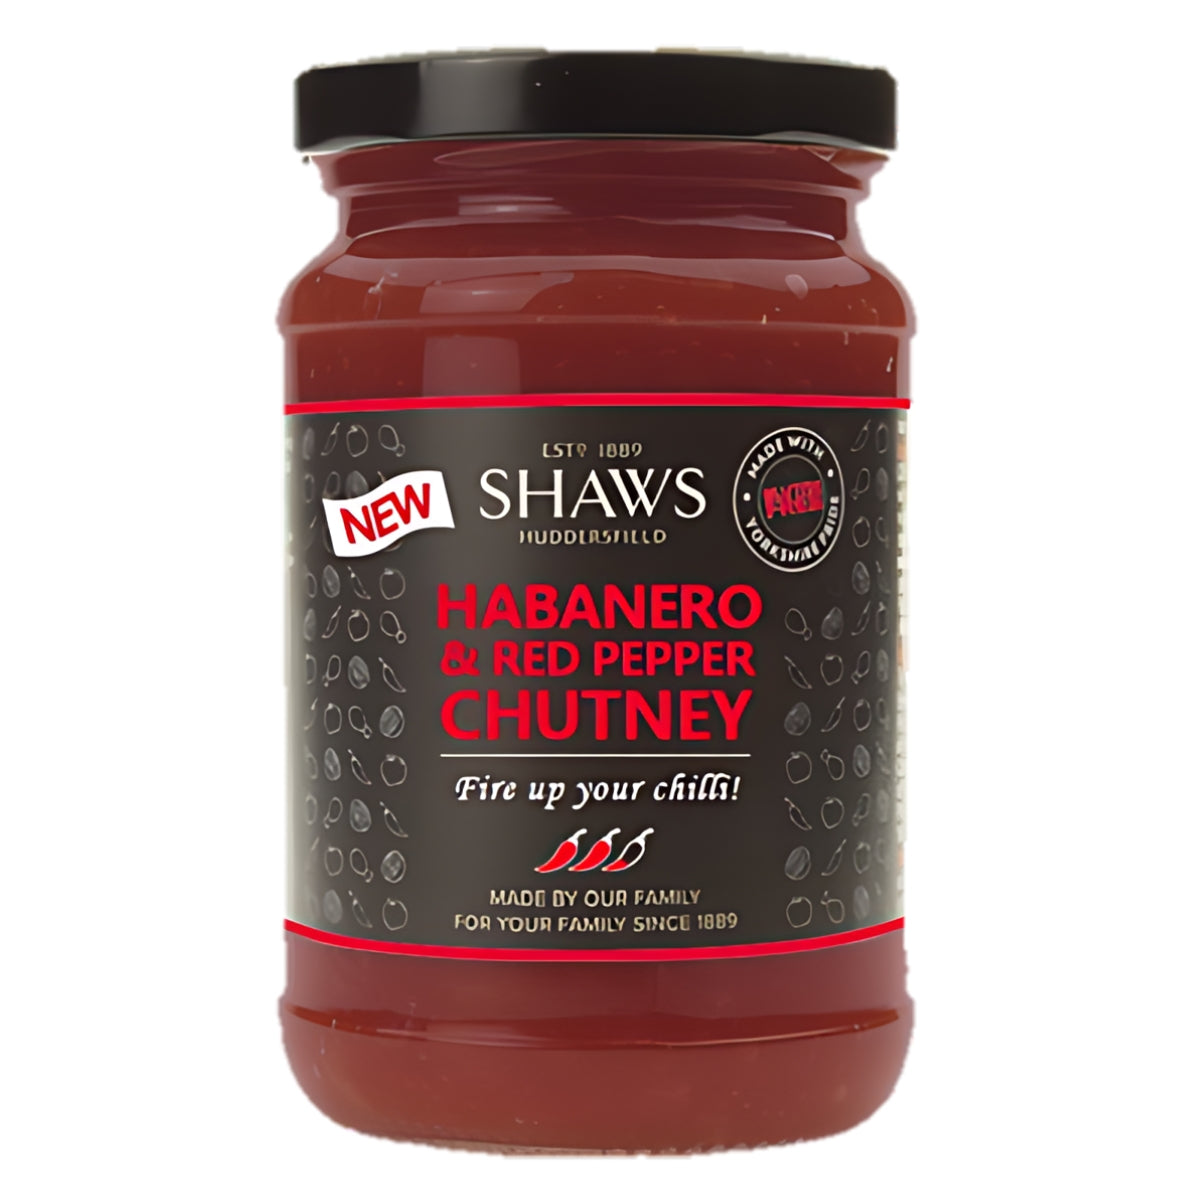 A jar of Shaws - Habanero & Red Pepper Chutney - 300g, labeled "Fire up your chili!" with a "New" and "Hot" badge, promoting its spiciness and recent introduction.